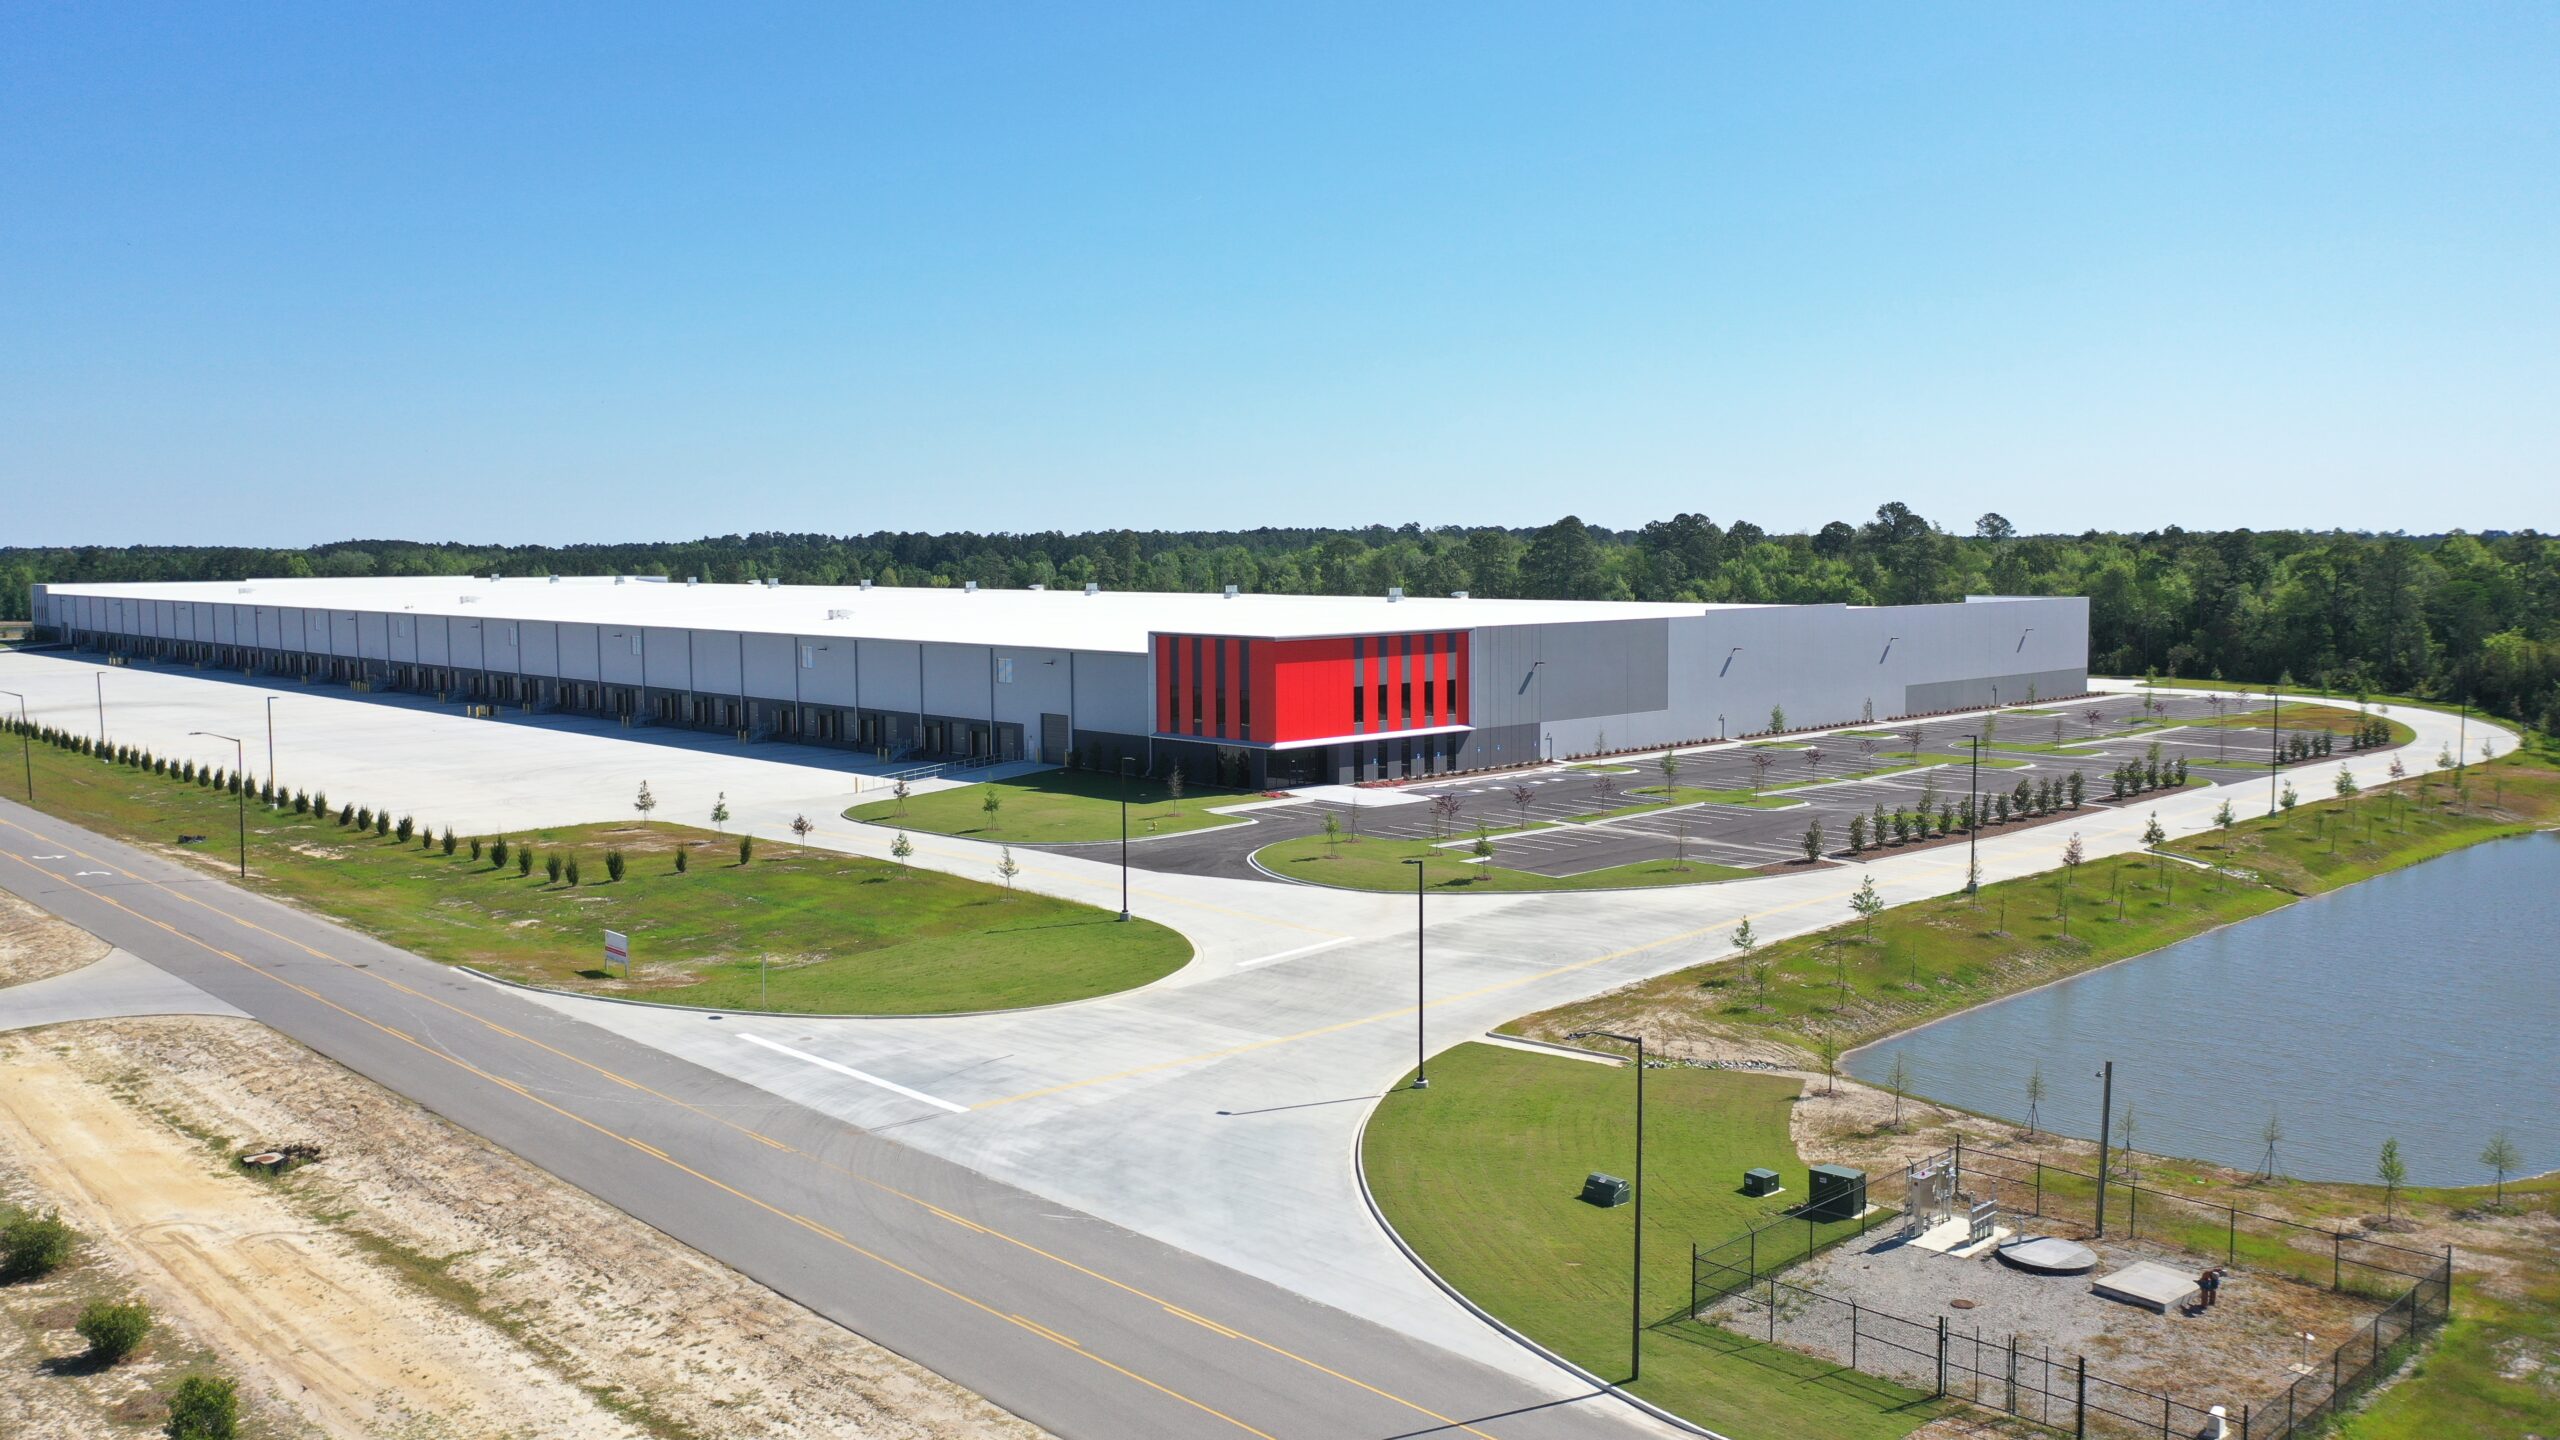 A large distribution center with many dock doors, including entrance road and detention pond